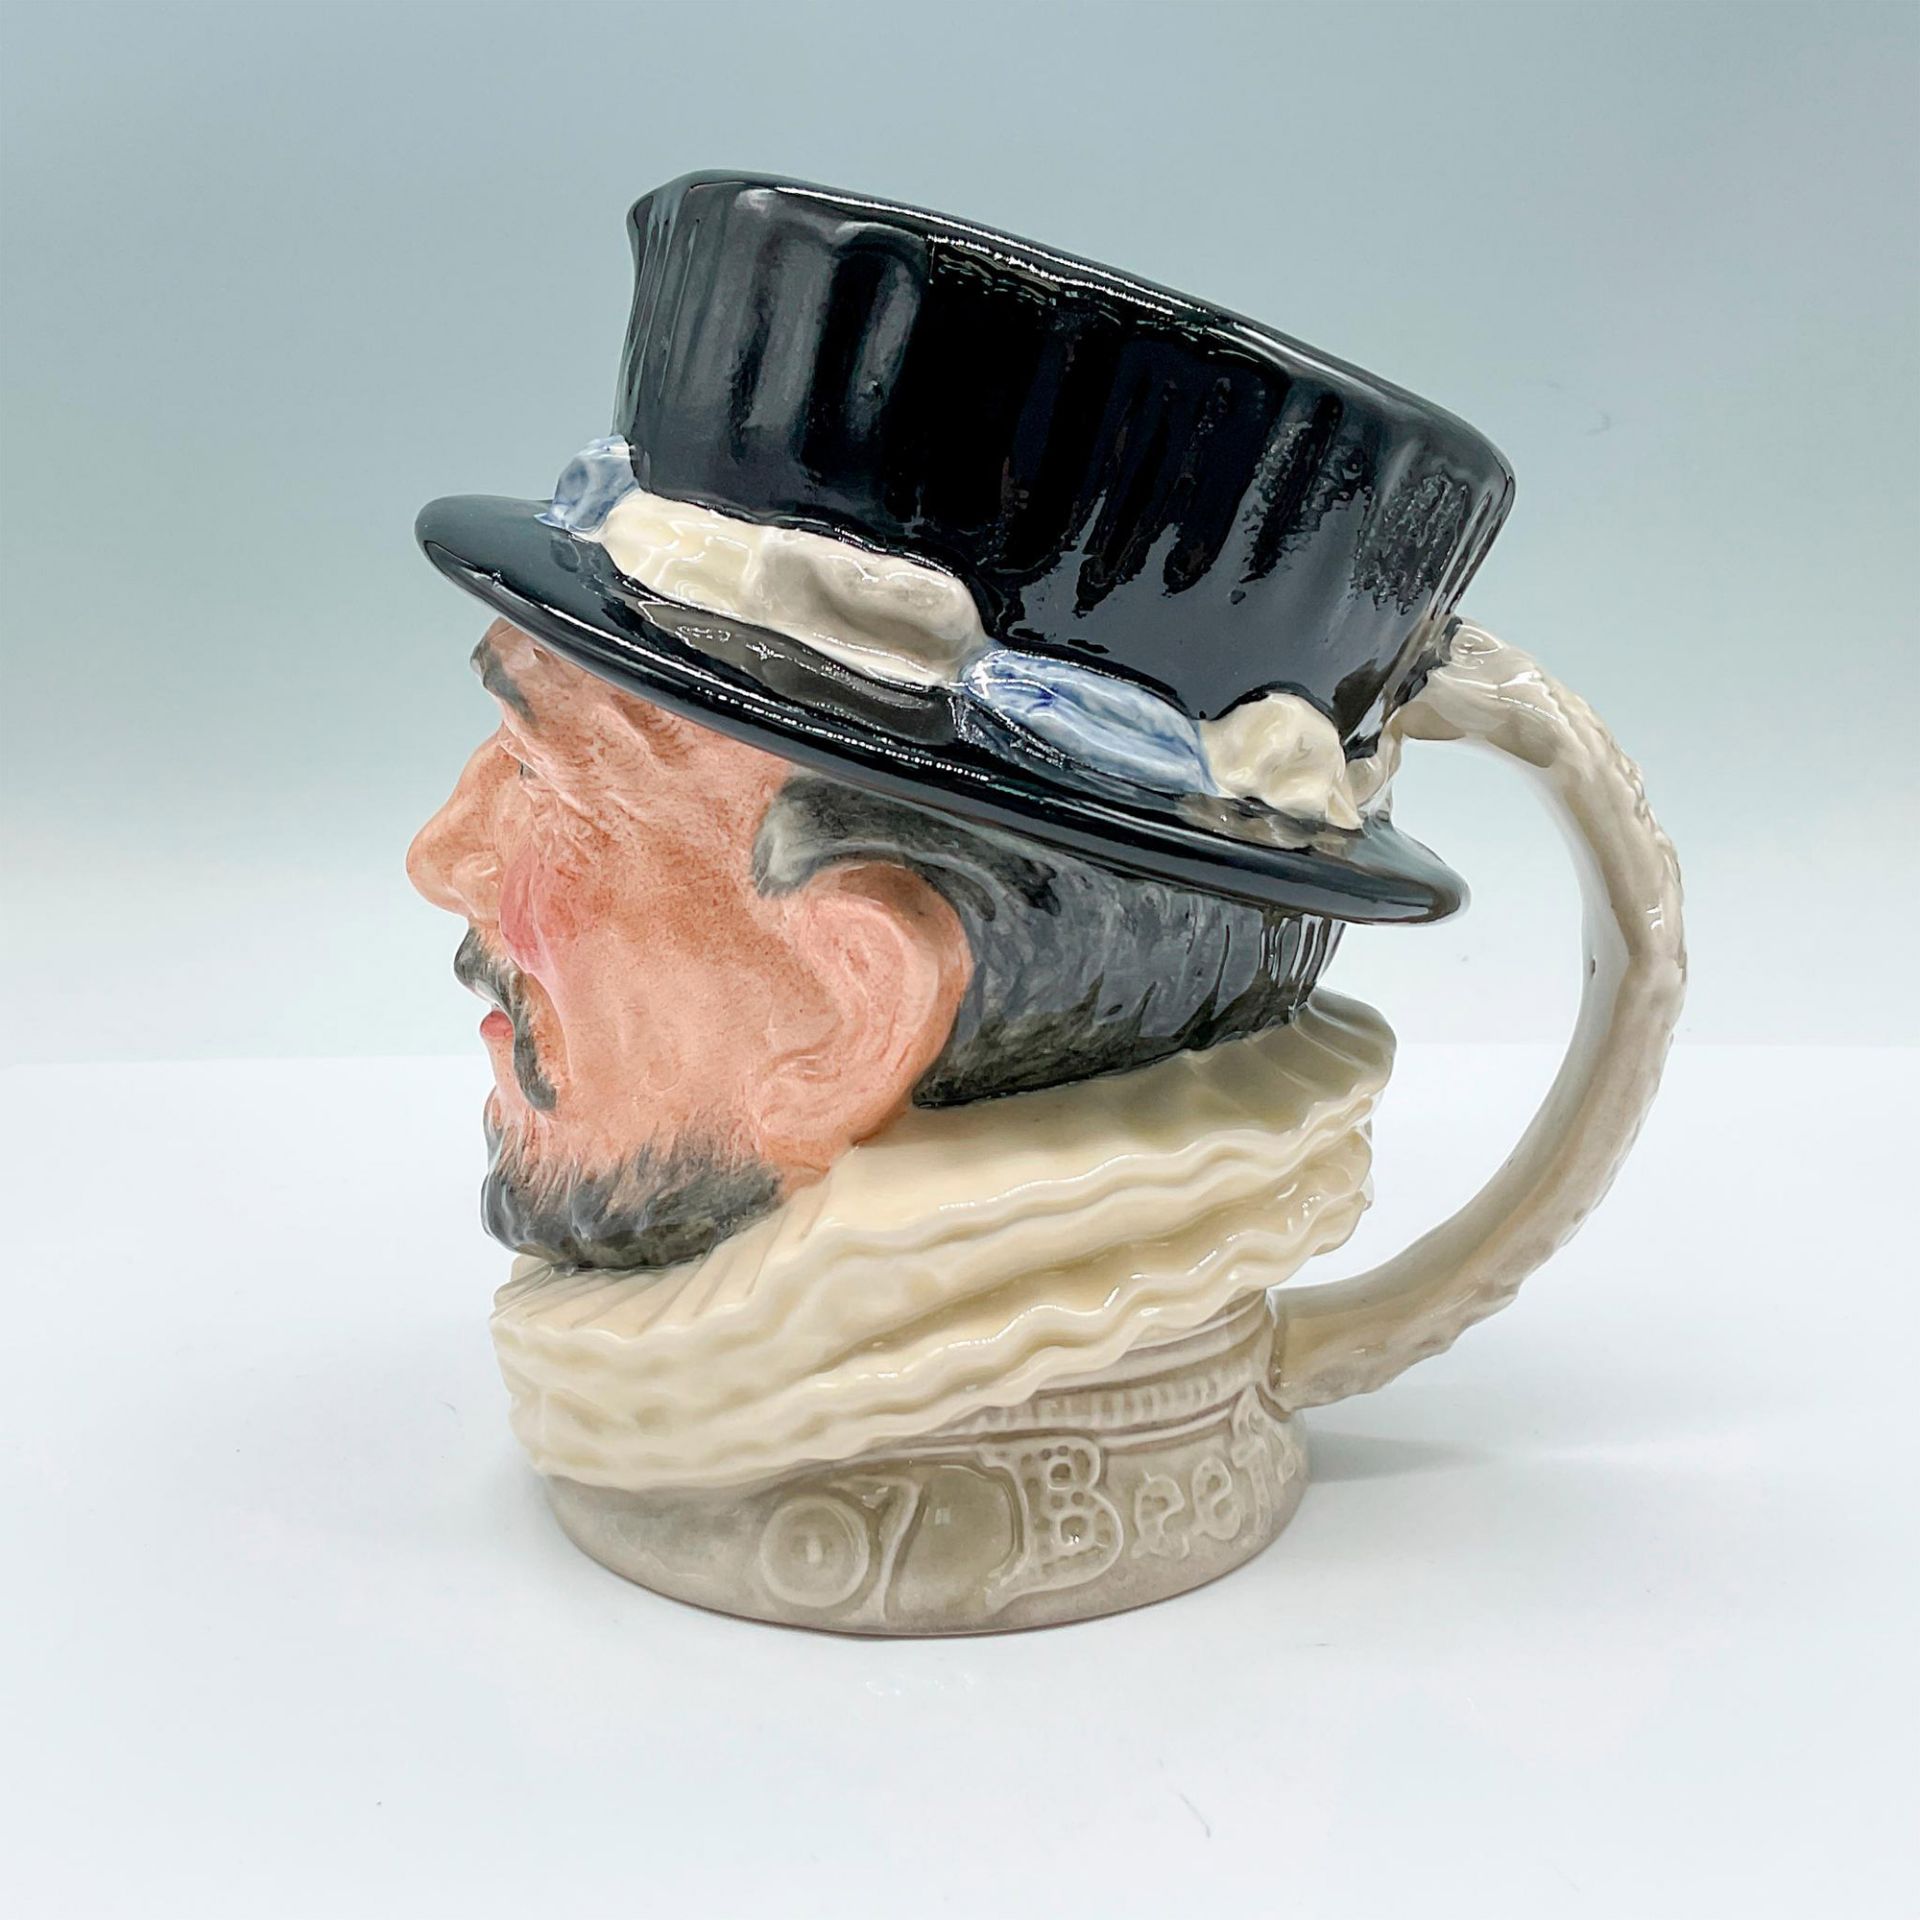 Royal Doulton Large Colorway Character Jug, Beefeater D6206 - Image 3 of 5